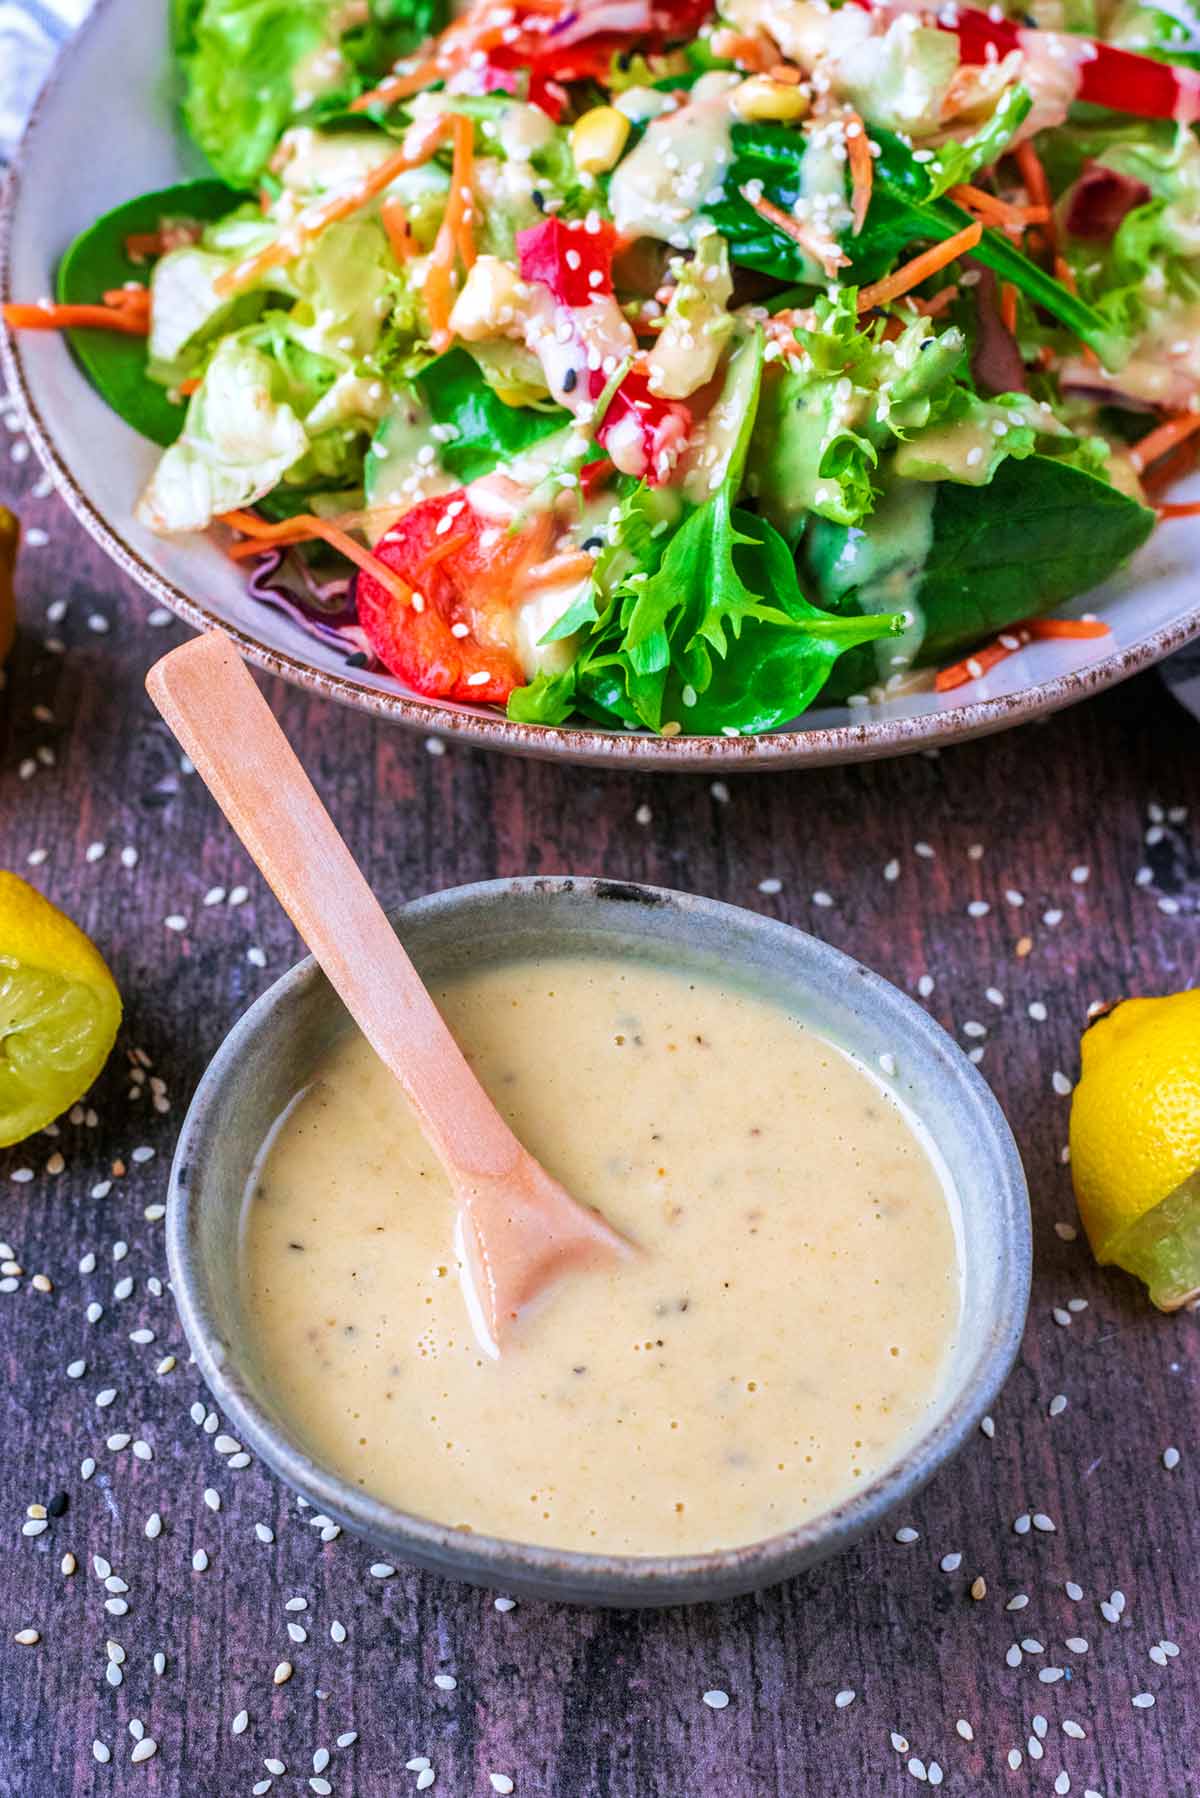 A bowl of tahini dressing in front of a bowl of salad.